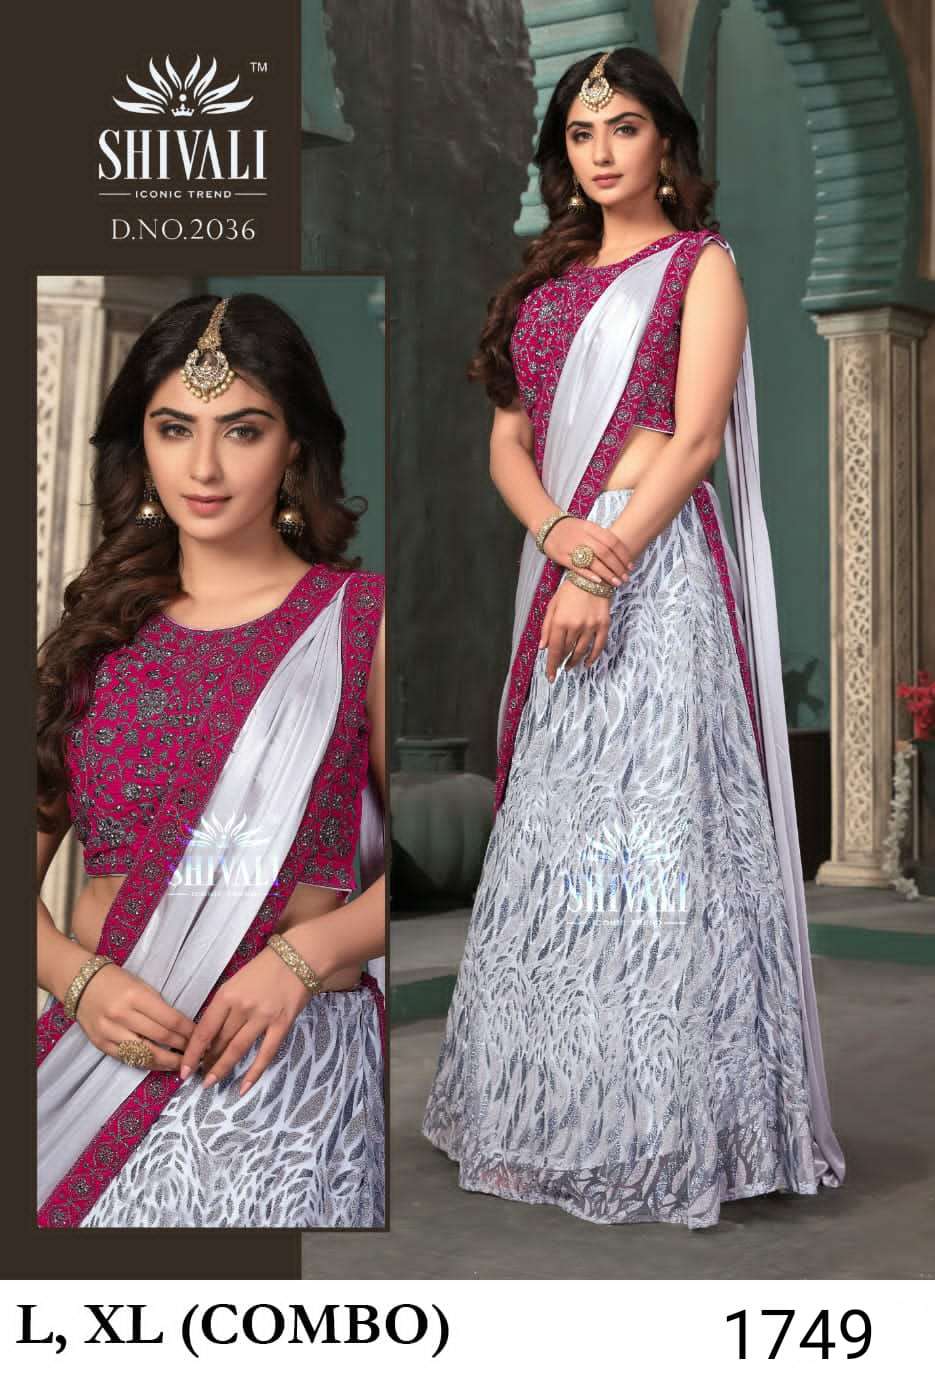 shivali ready to wear sarees exclusive wedding range at affordable rates 